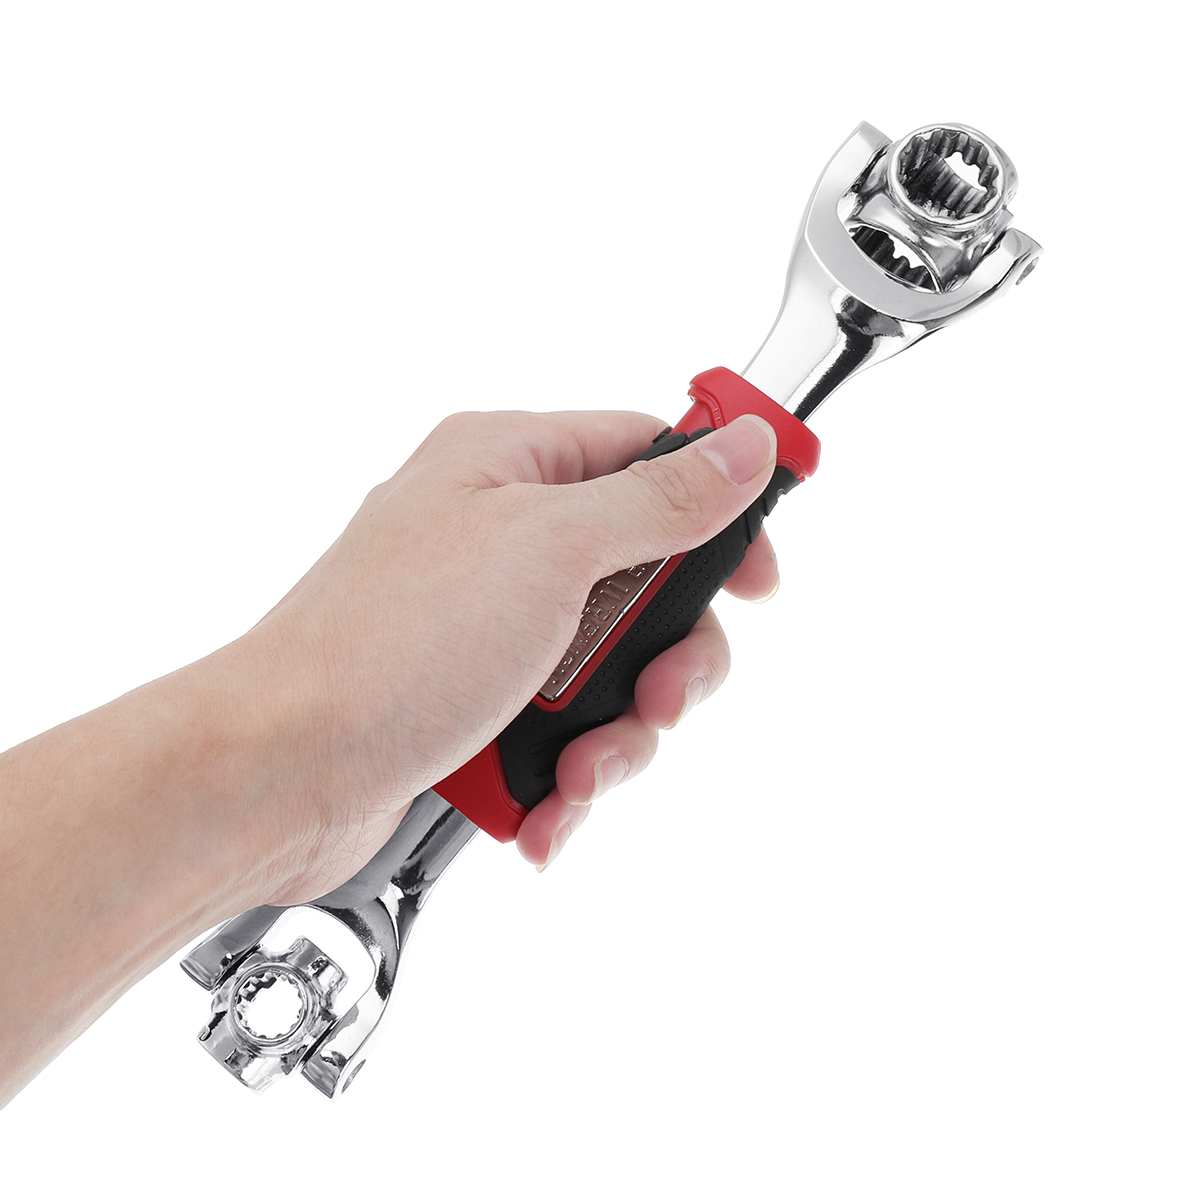 48 in 1 Multifunctional Wrench for Spline Bolts All Size Torx 360° Socket Tools Auto Repair 127